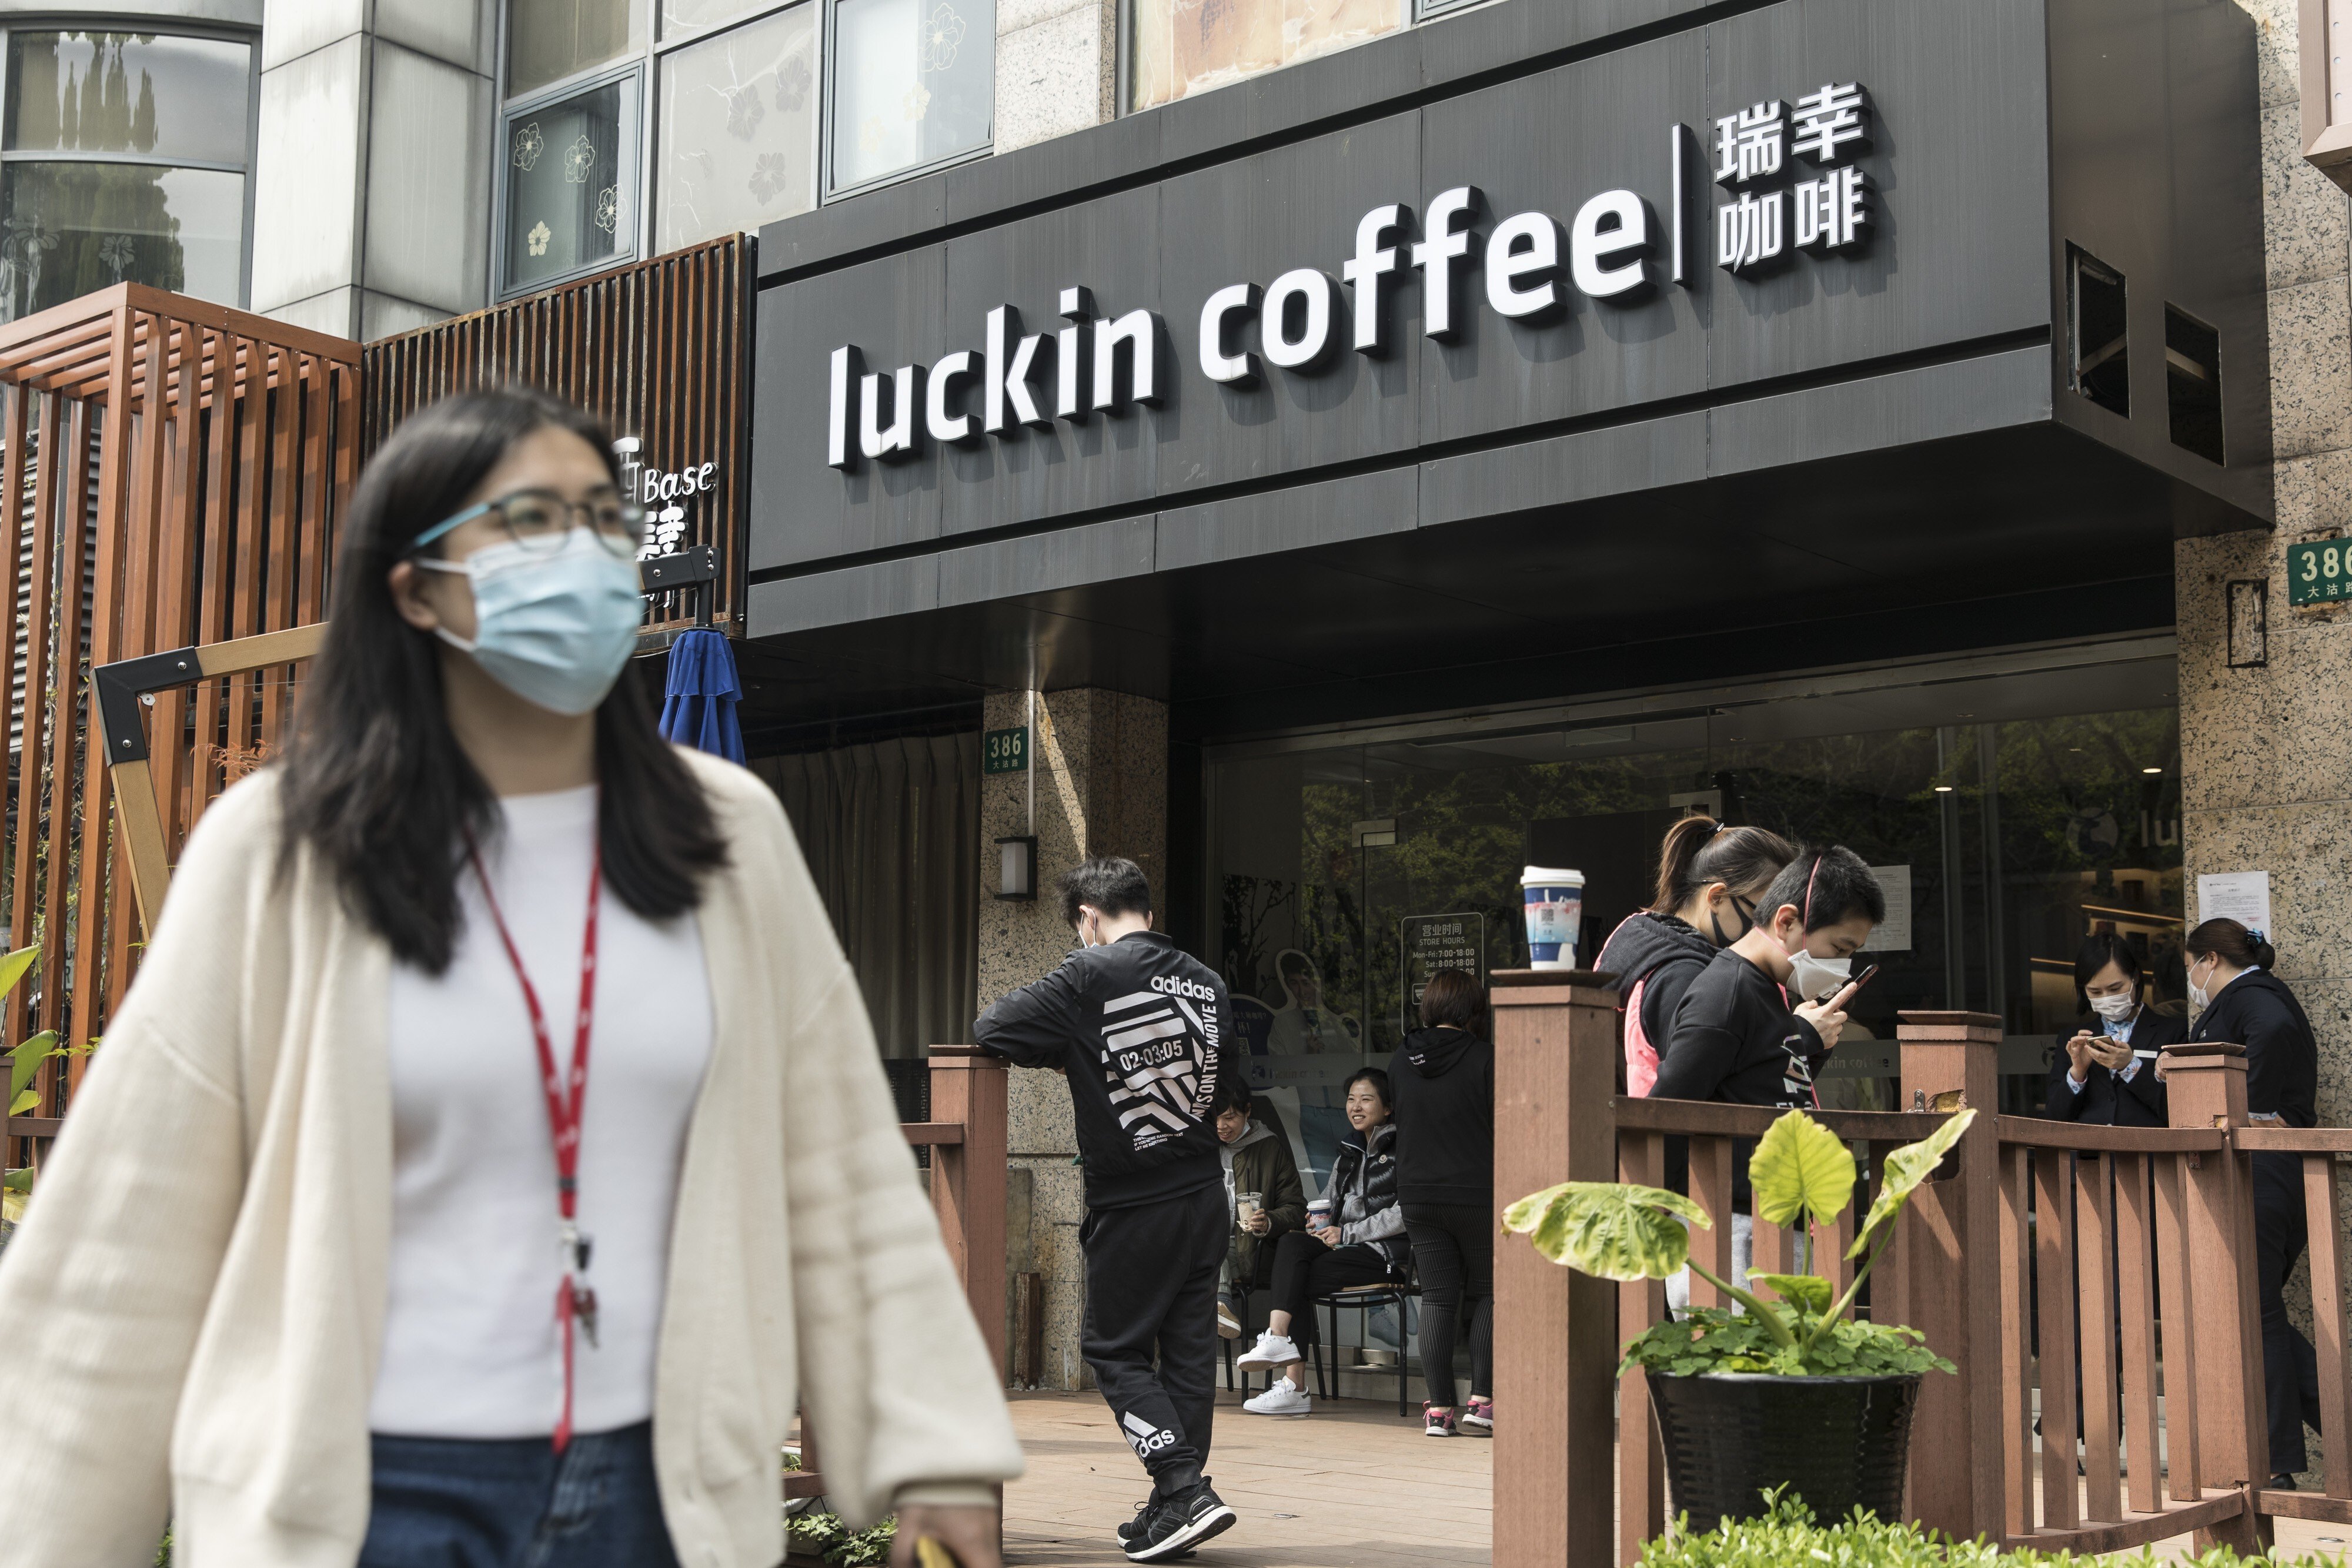 A Luckin Coffee outlet in Shanghai. The Xiamen-based start-up operated 3,500 stores globally as of late last year. Photo: Bloomberg